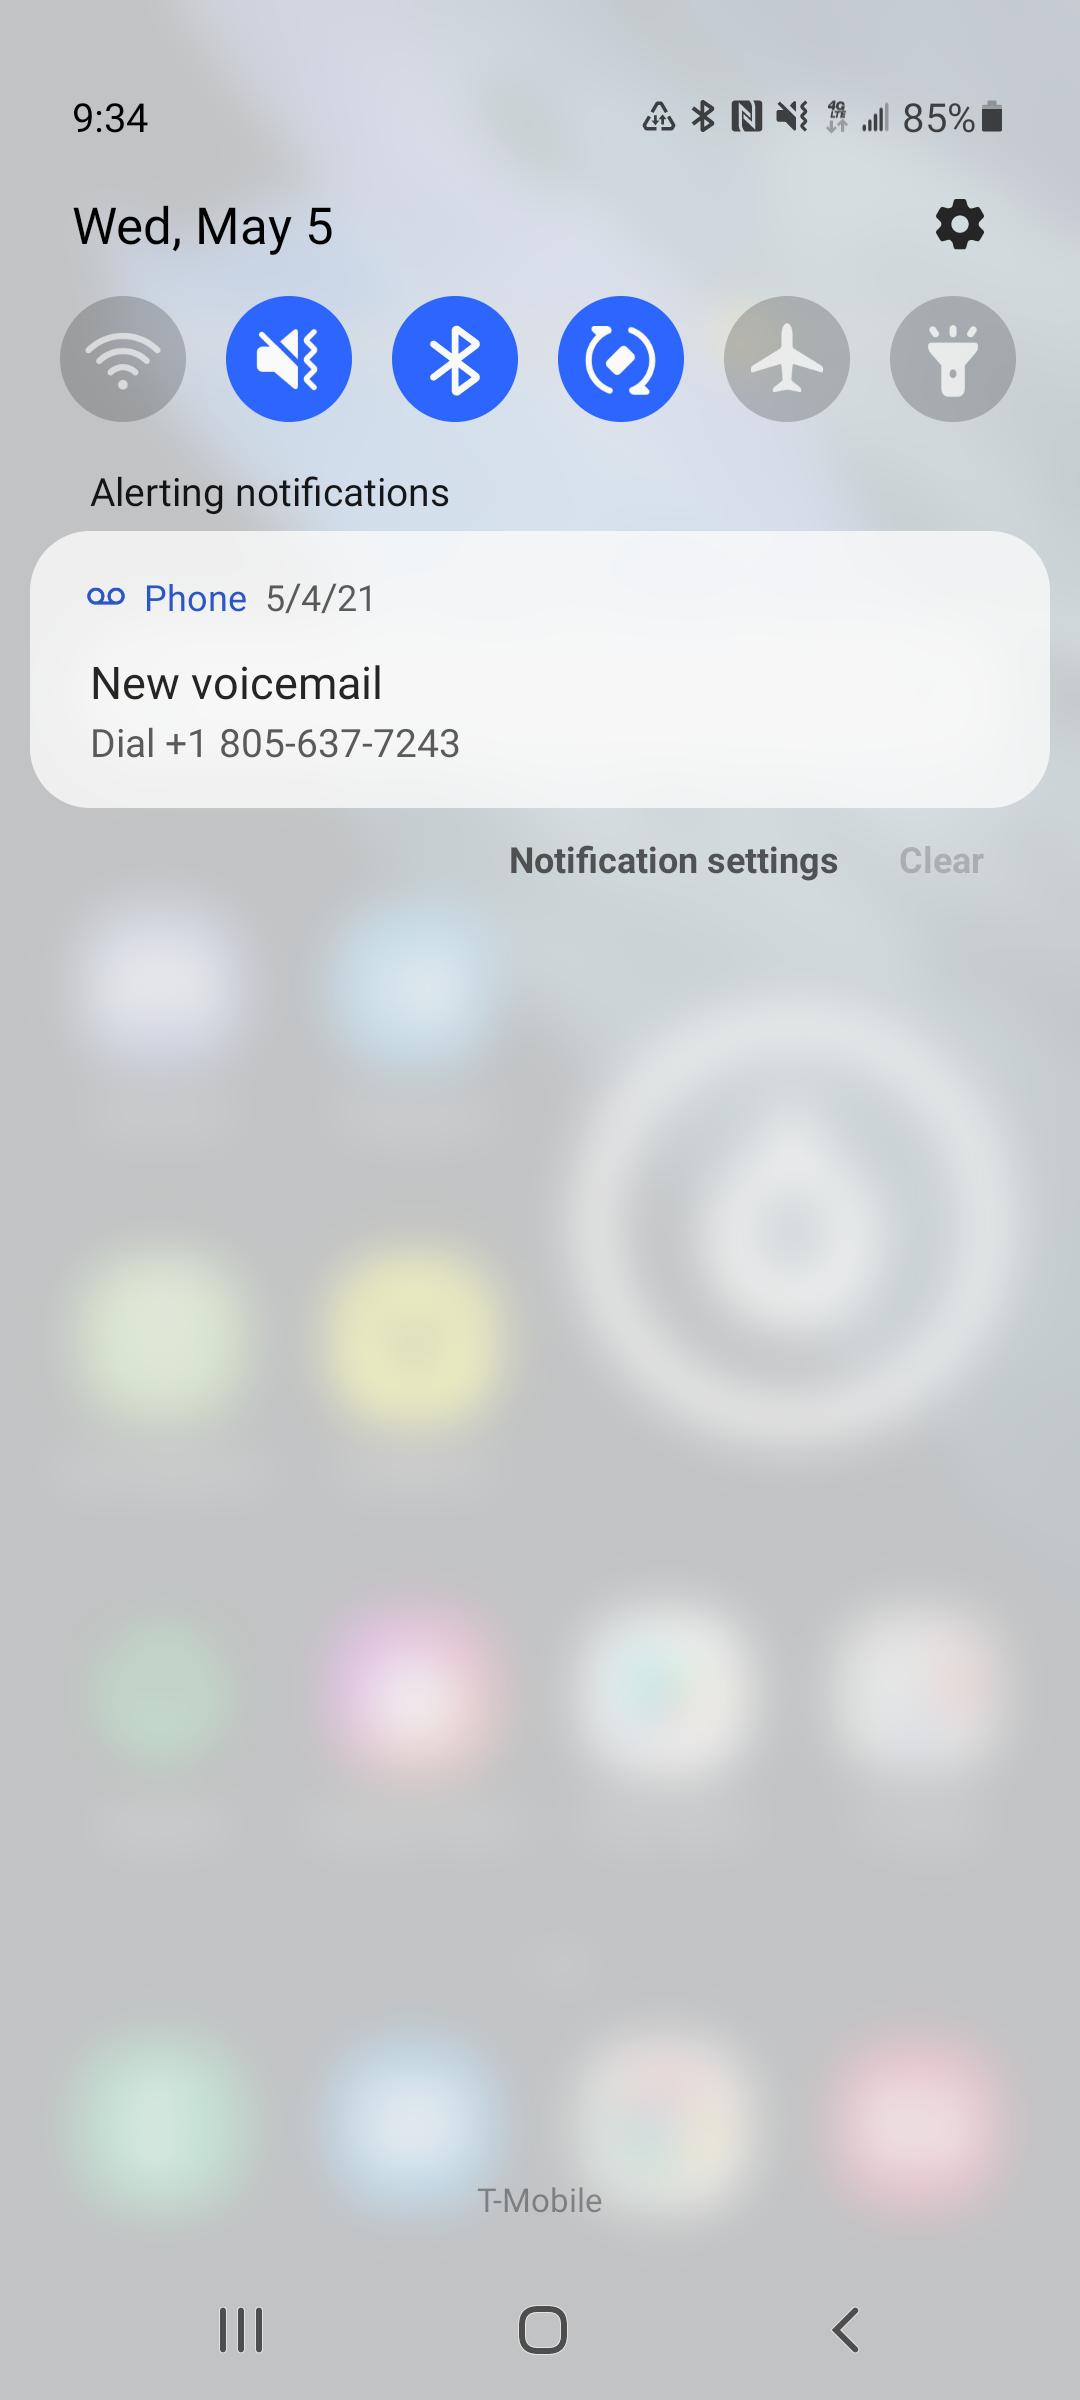 How Do I Get Rid of the Voicemail Notification on My Android